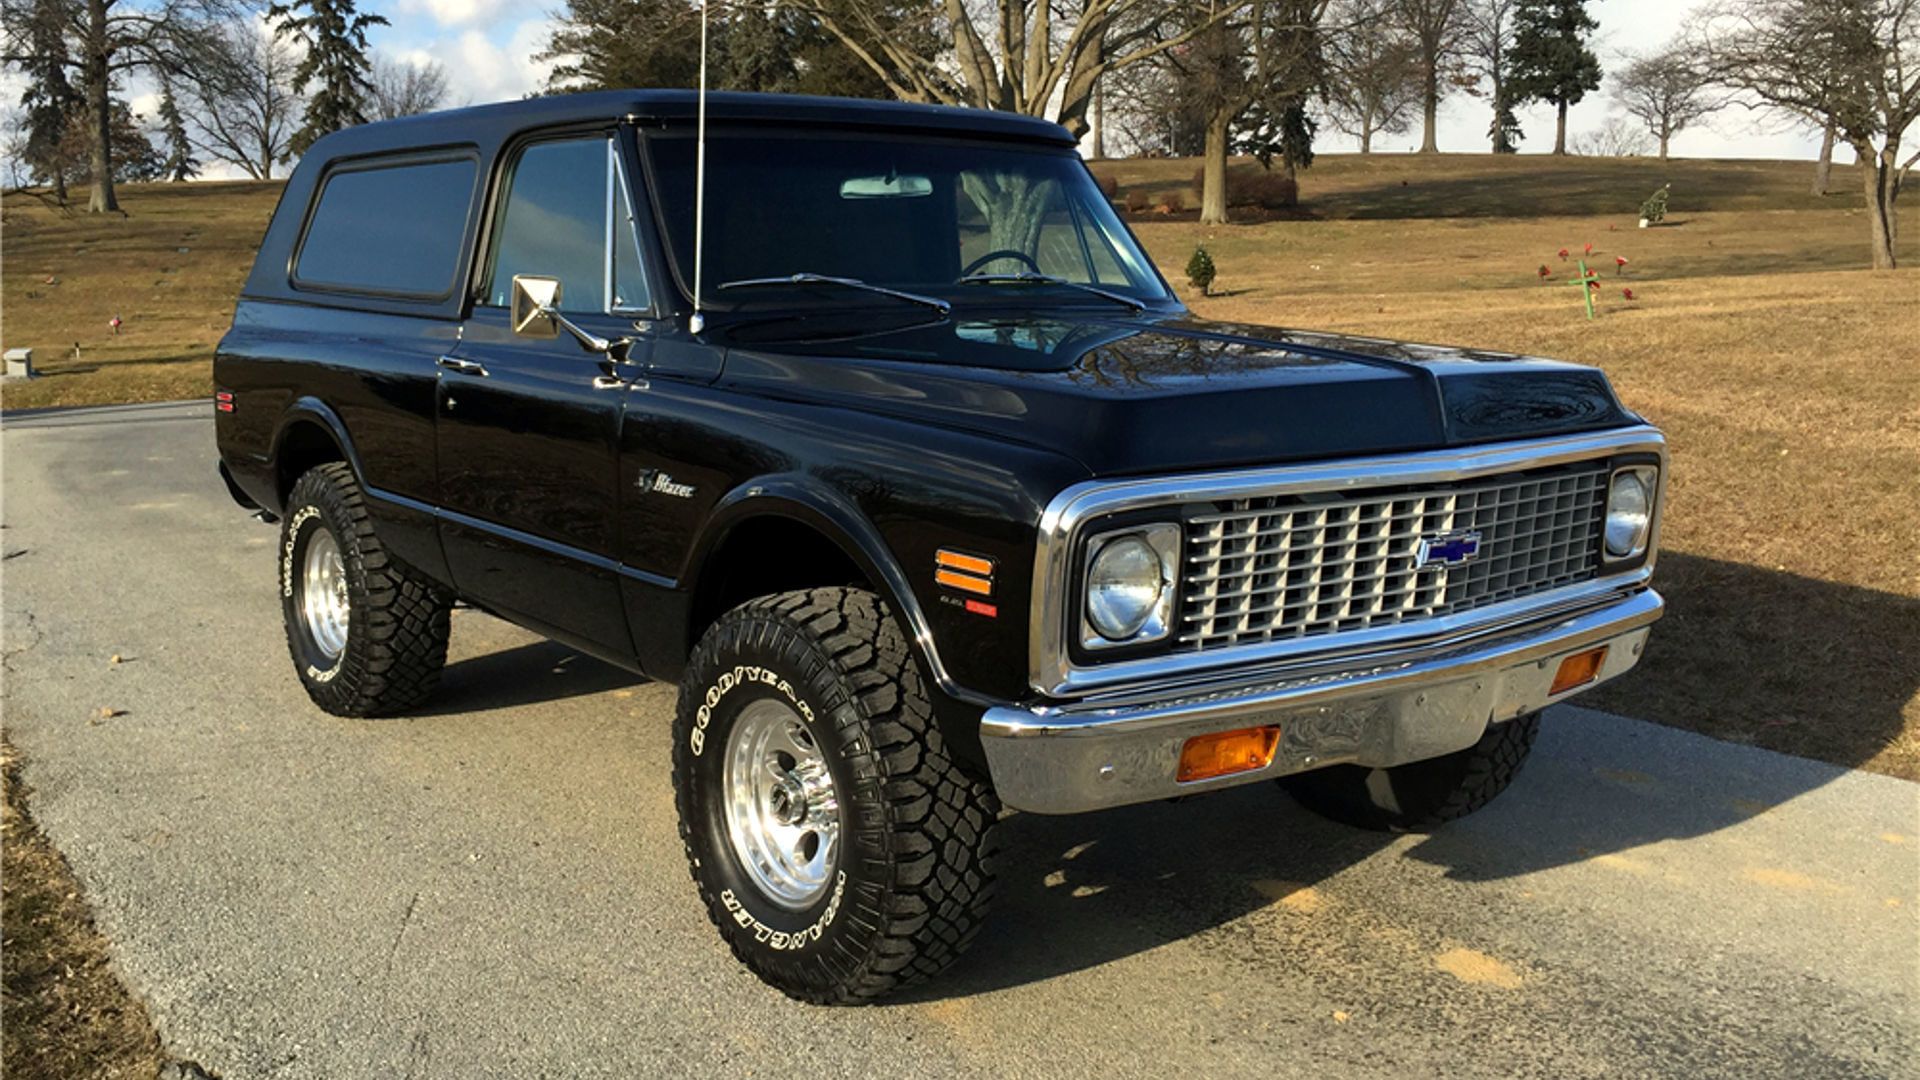 Why Did This 1971 Chevy K5 Blazer Sell For $220K?